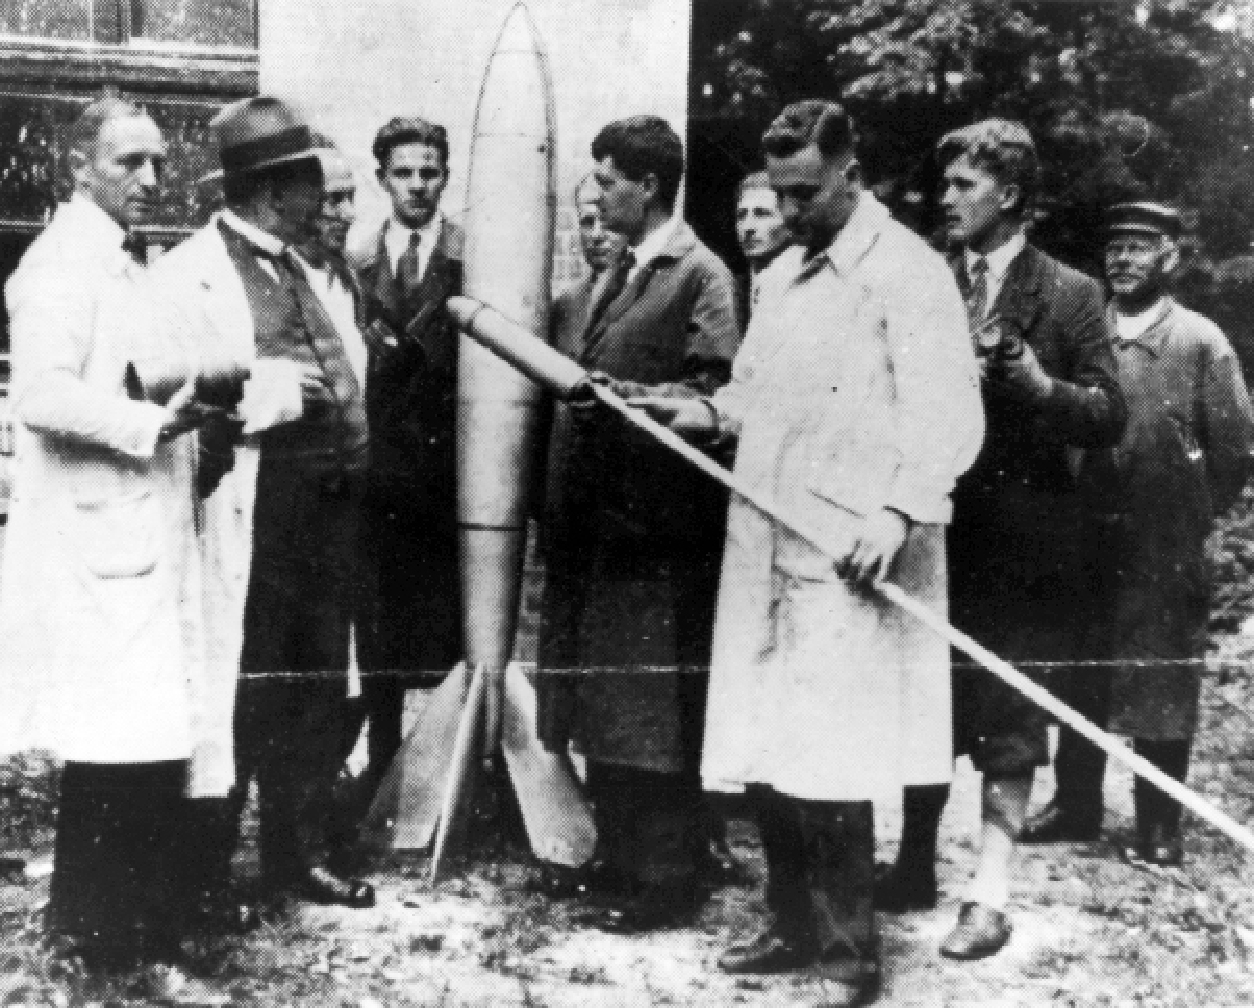 Group of rocket experimenters standing next to a rocket. One of them holds a rocket attached to a long pole.